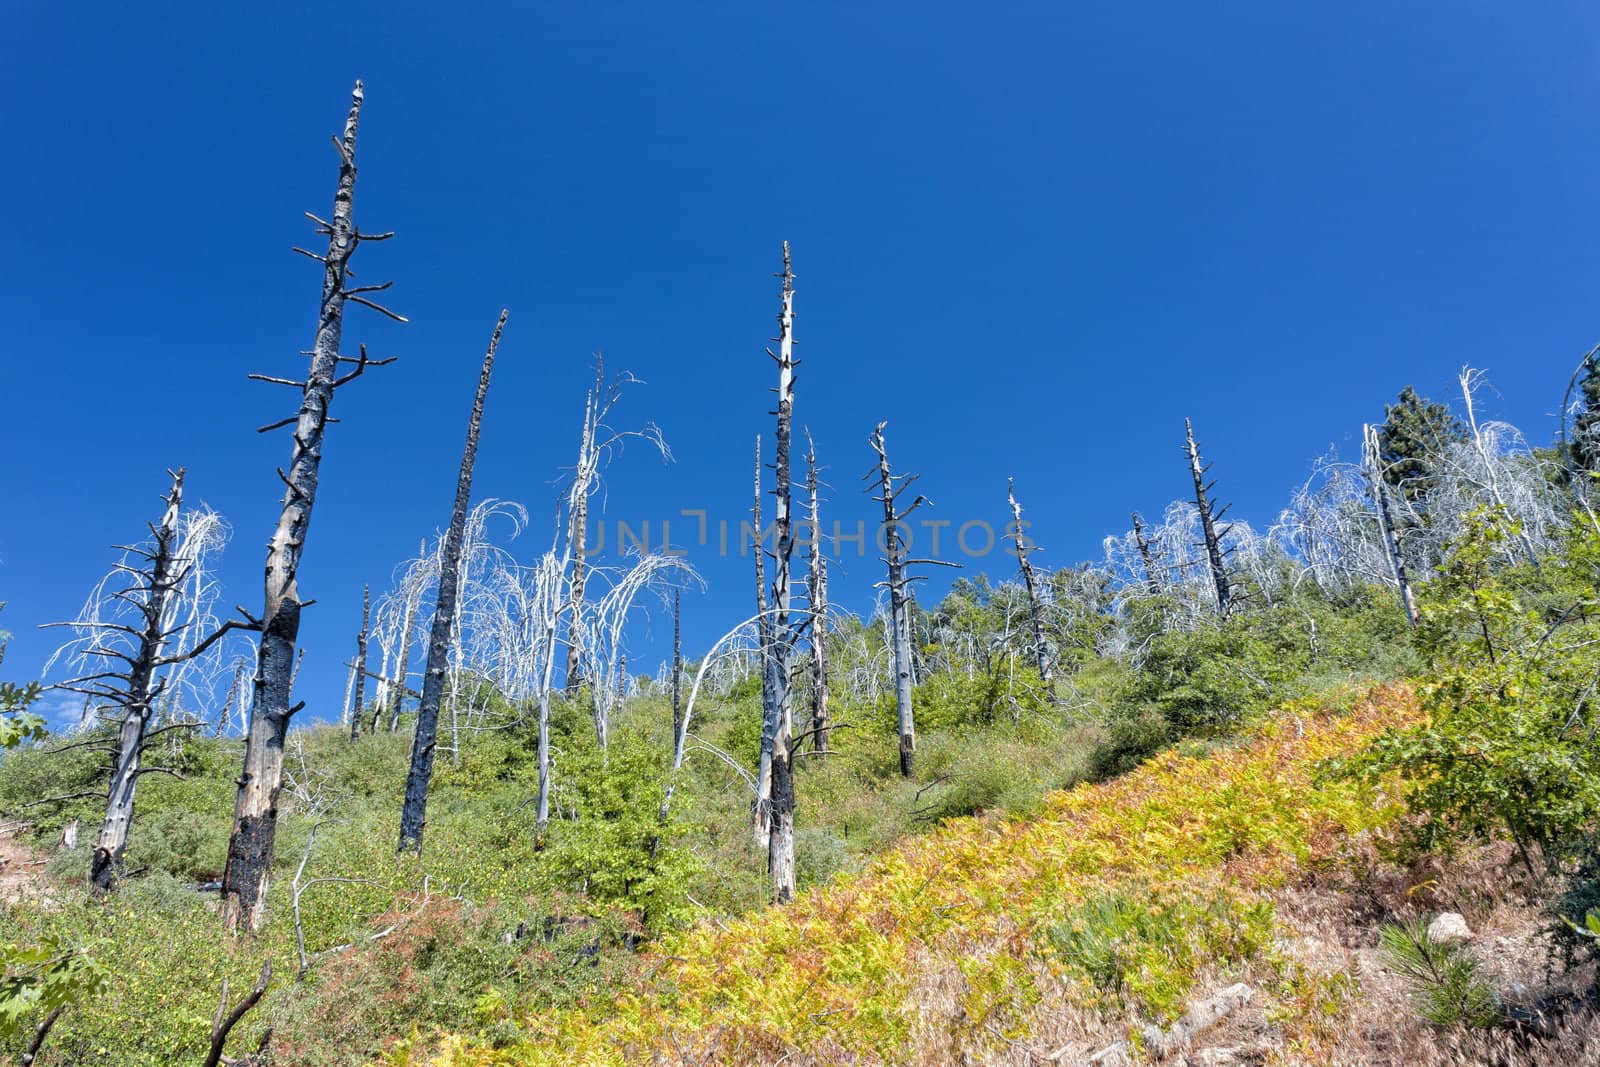 Forest Fire Damage in the San Bernardino National Forest